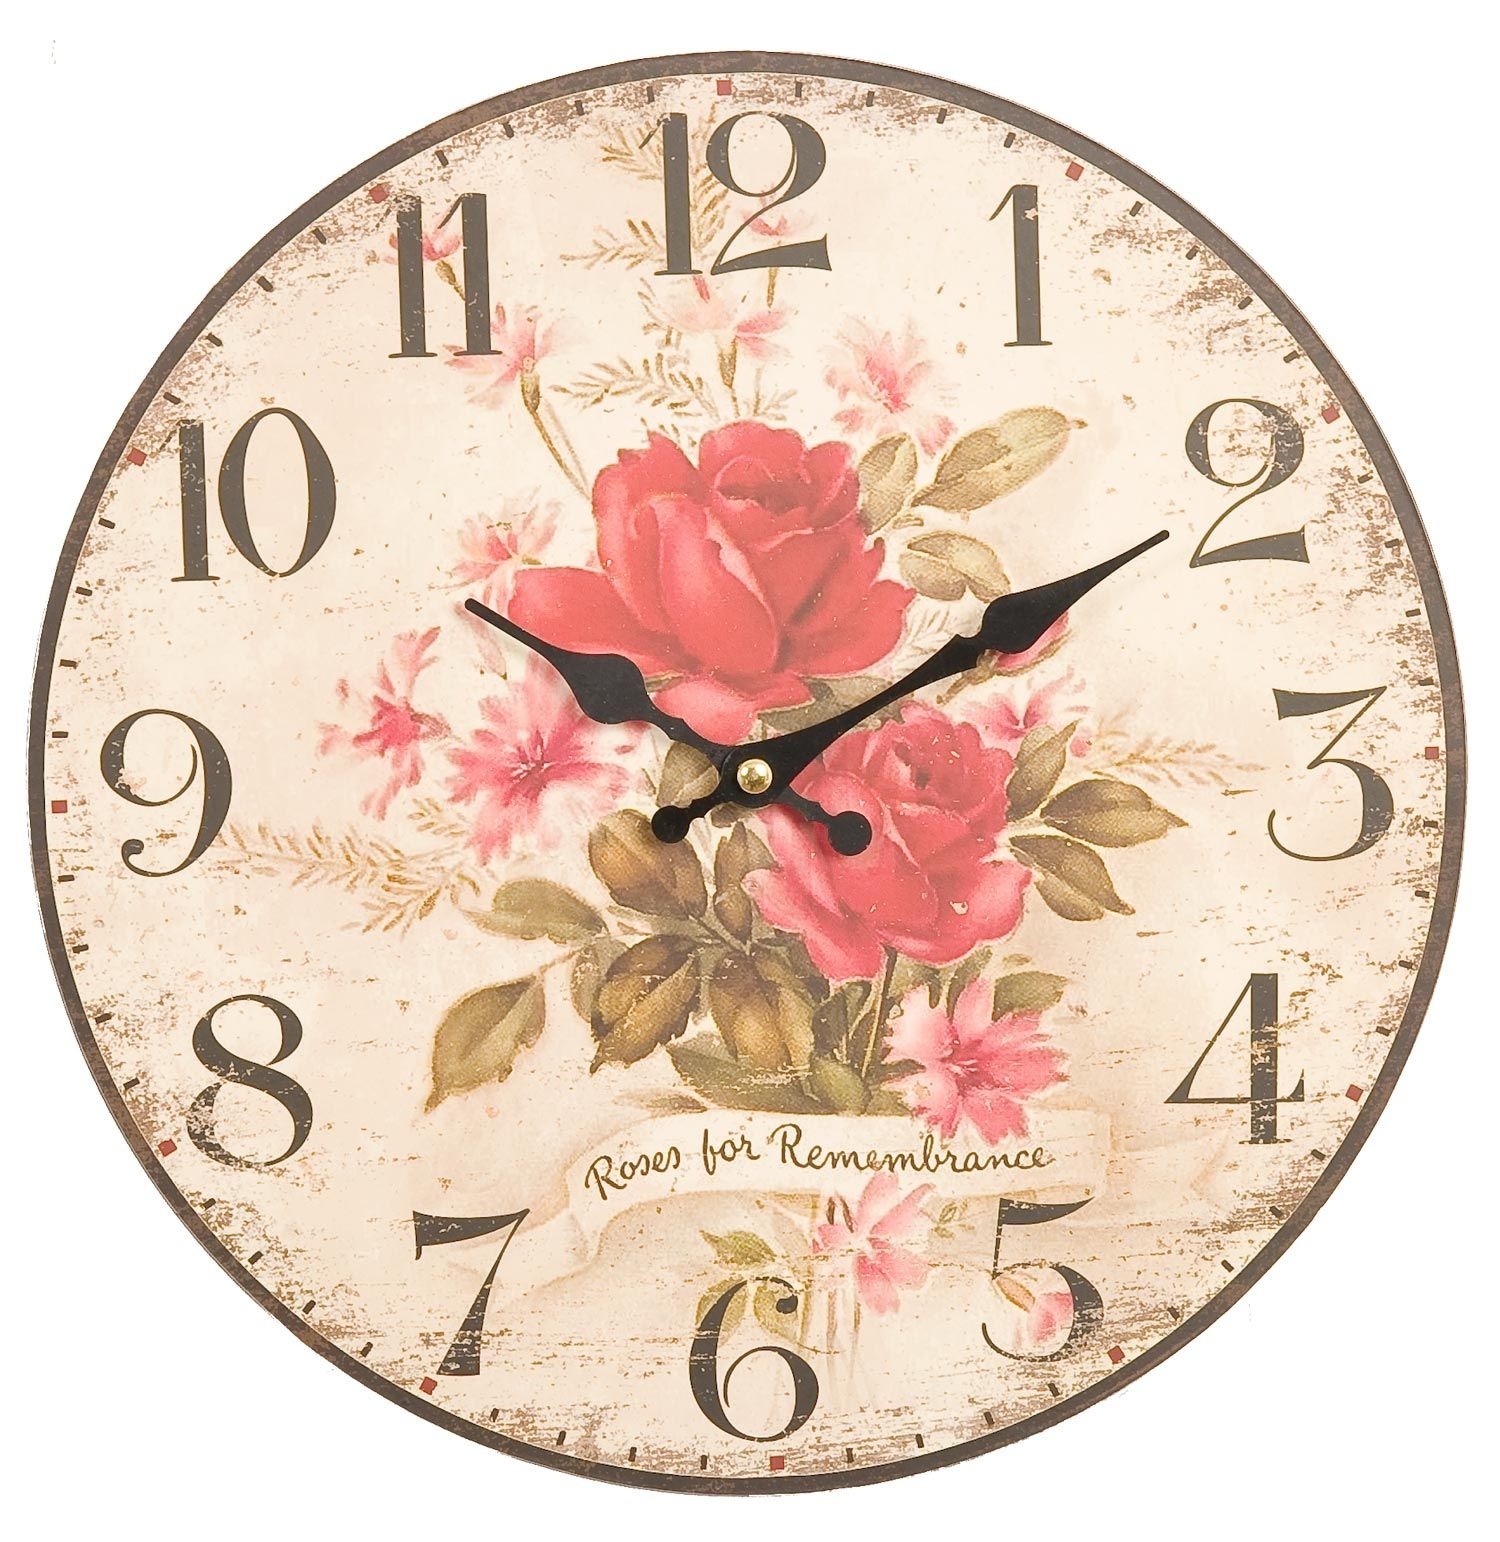 New shabby chic distressed red rose wall clock